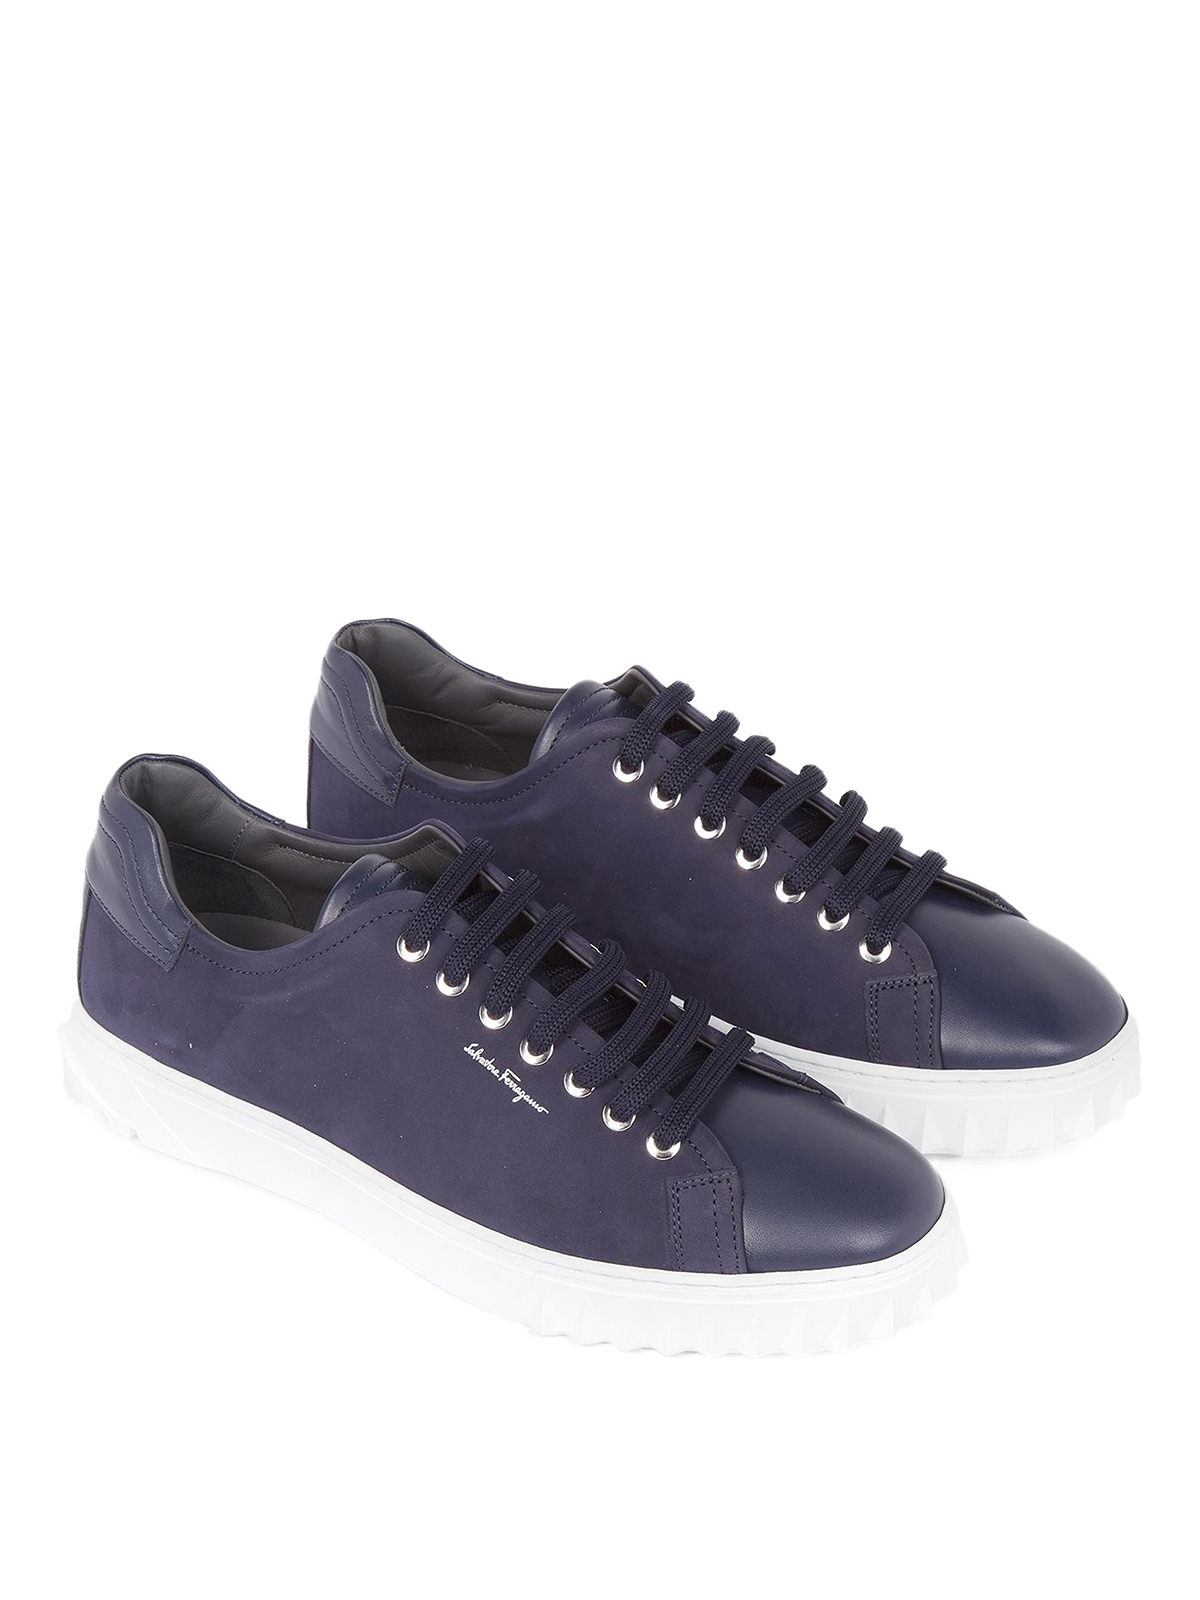 blue sneakers - trainers - 02A888 686300